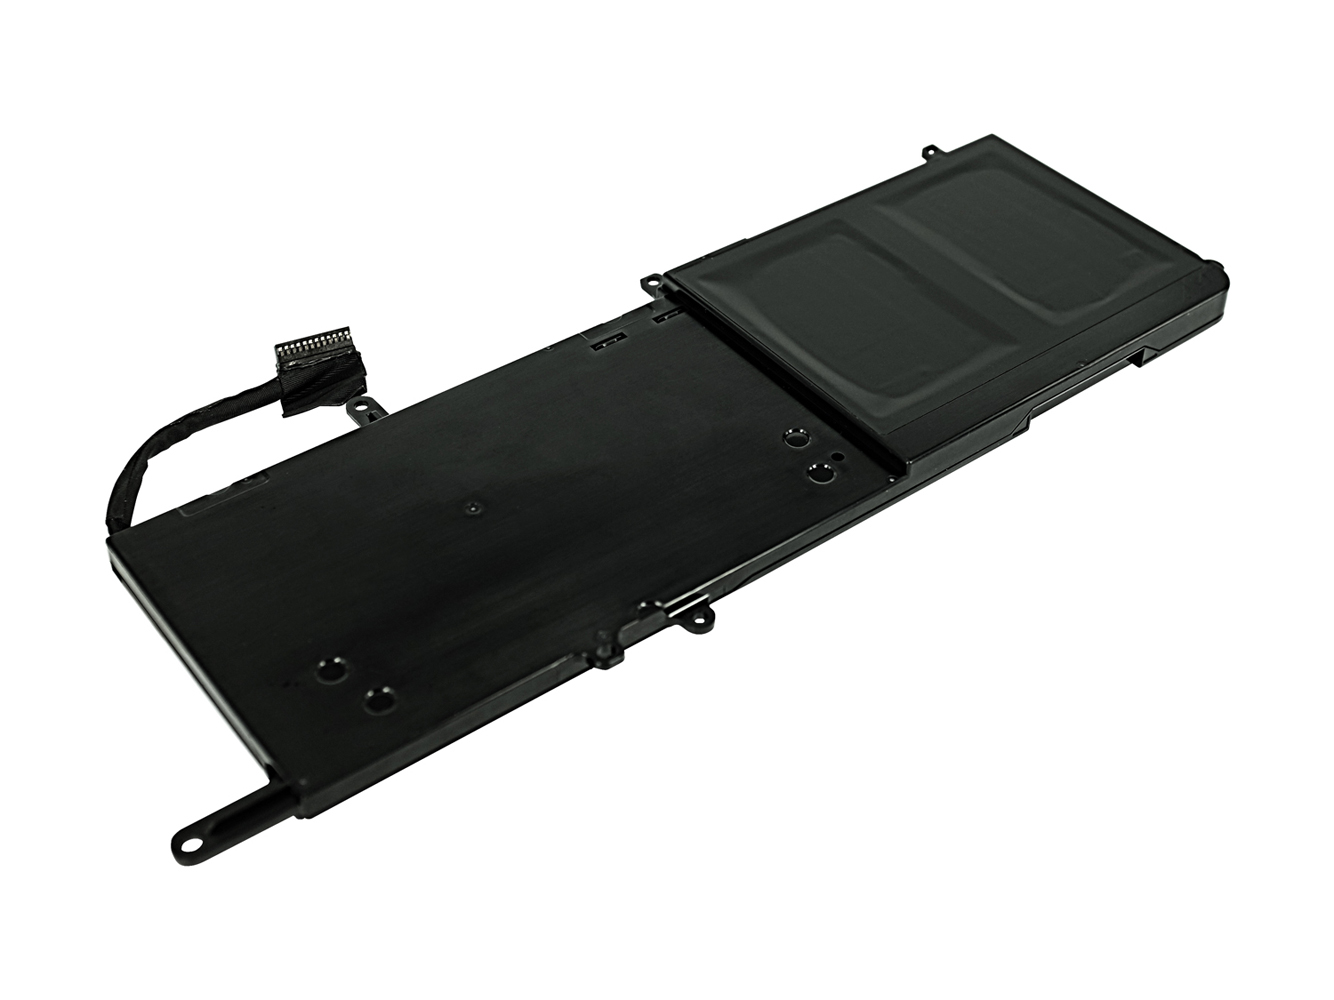 0546FF, 0HF250 replacement Laptop Battery for Dell Alienware 15 R3, Alienware 15 R4, 11.40V